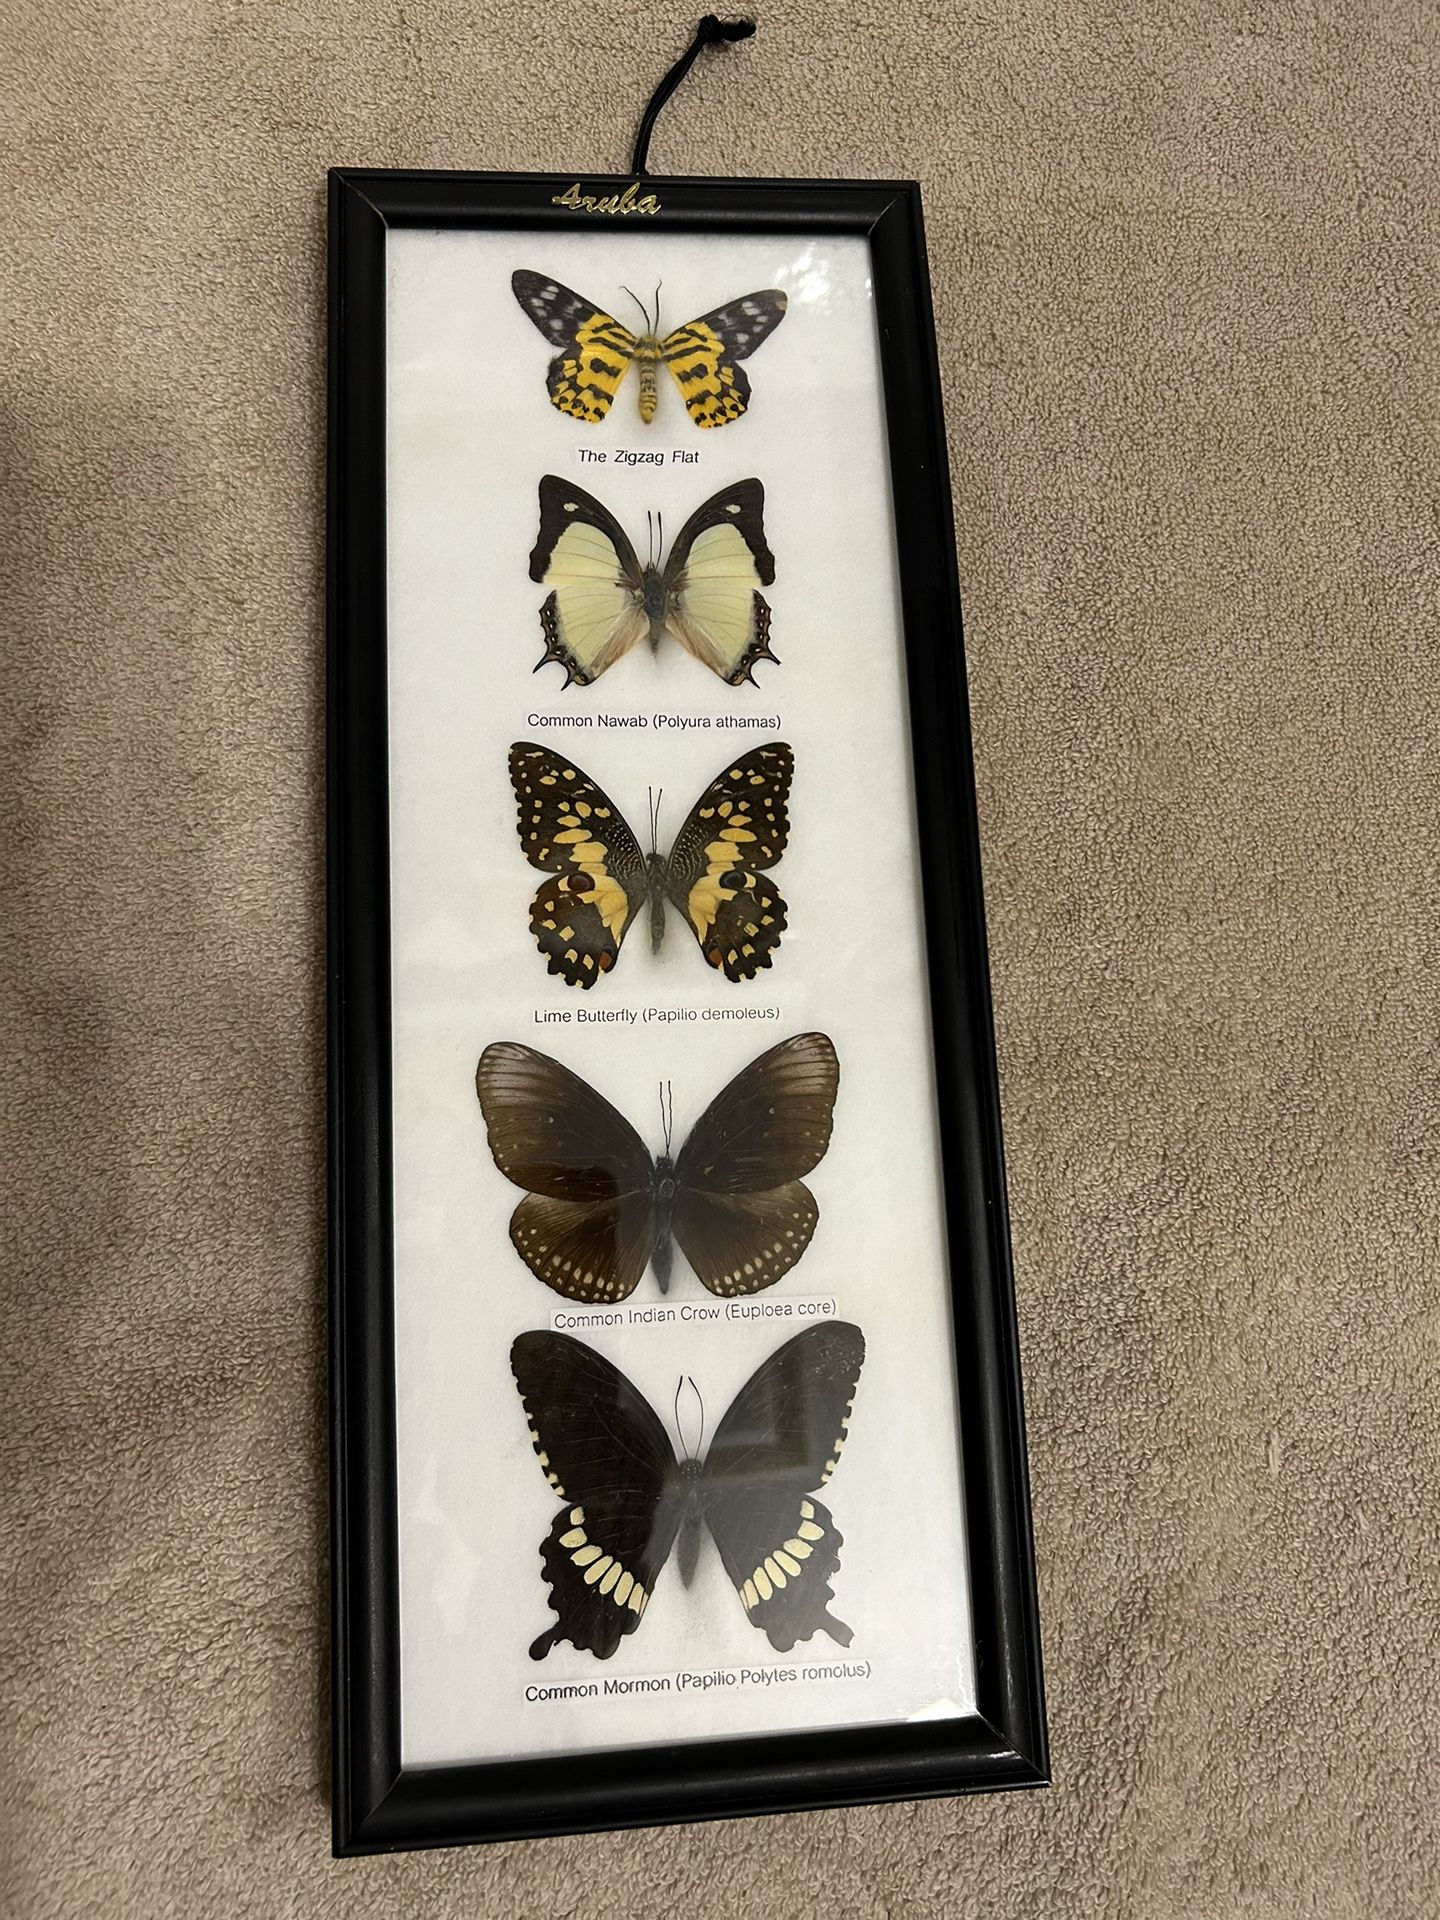 Real Framed Butterfly Collection Artwork With 5 Specimens Of Butterflies With There Names Under Them